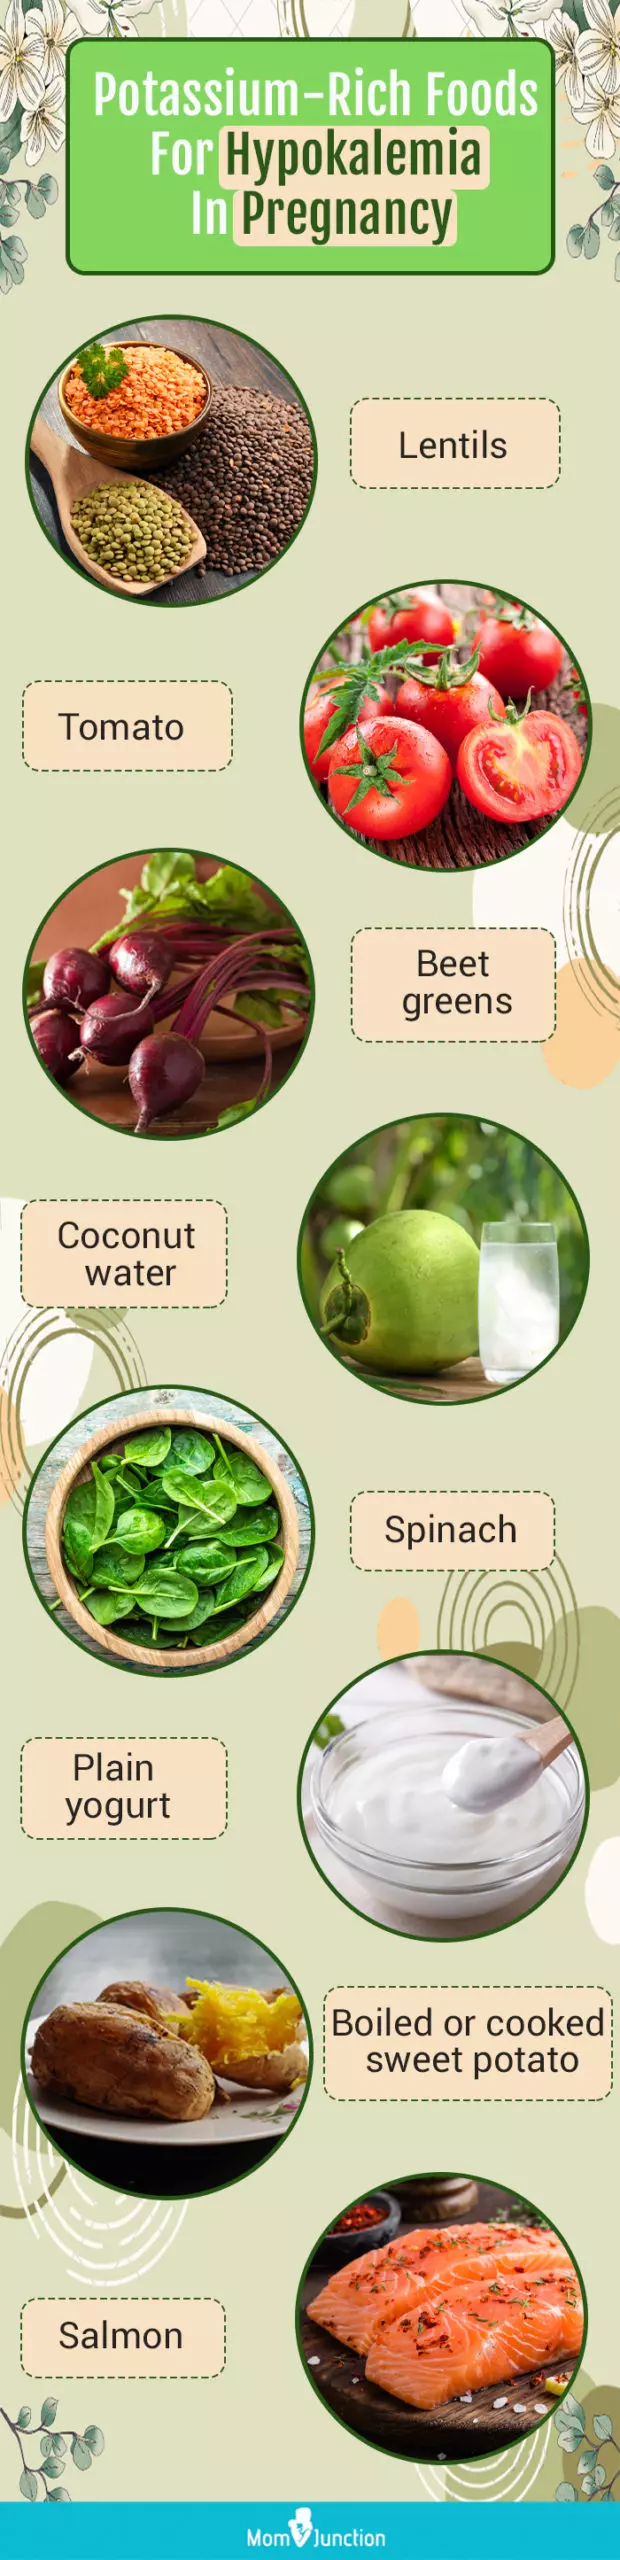 potassium-rich foods for hypokalemia in pregnancy (infographic)